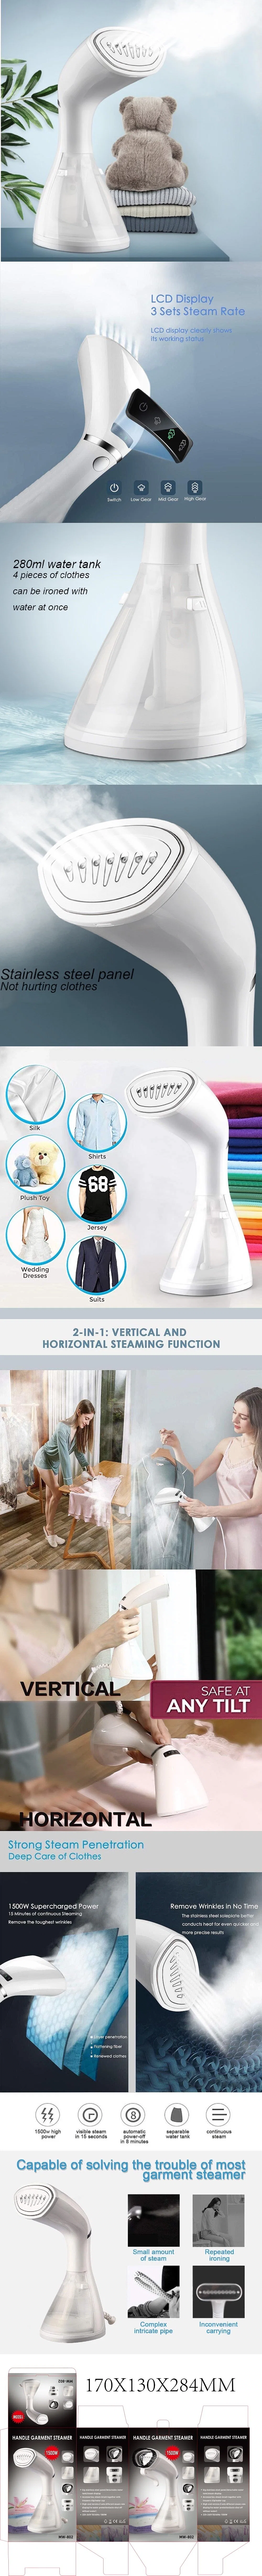 Professional Manufacturer of Portable Handheld Garment Steam Iron with 3levels Steam Rate